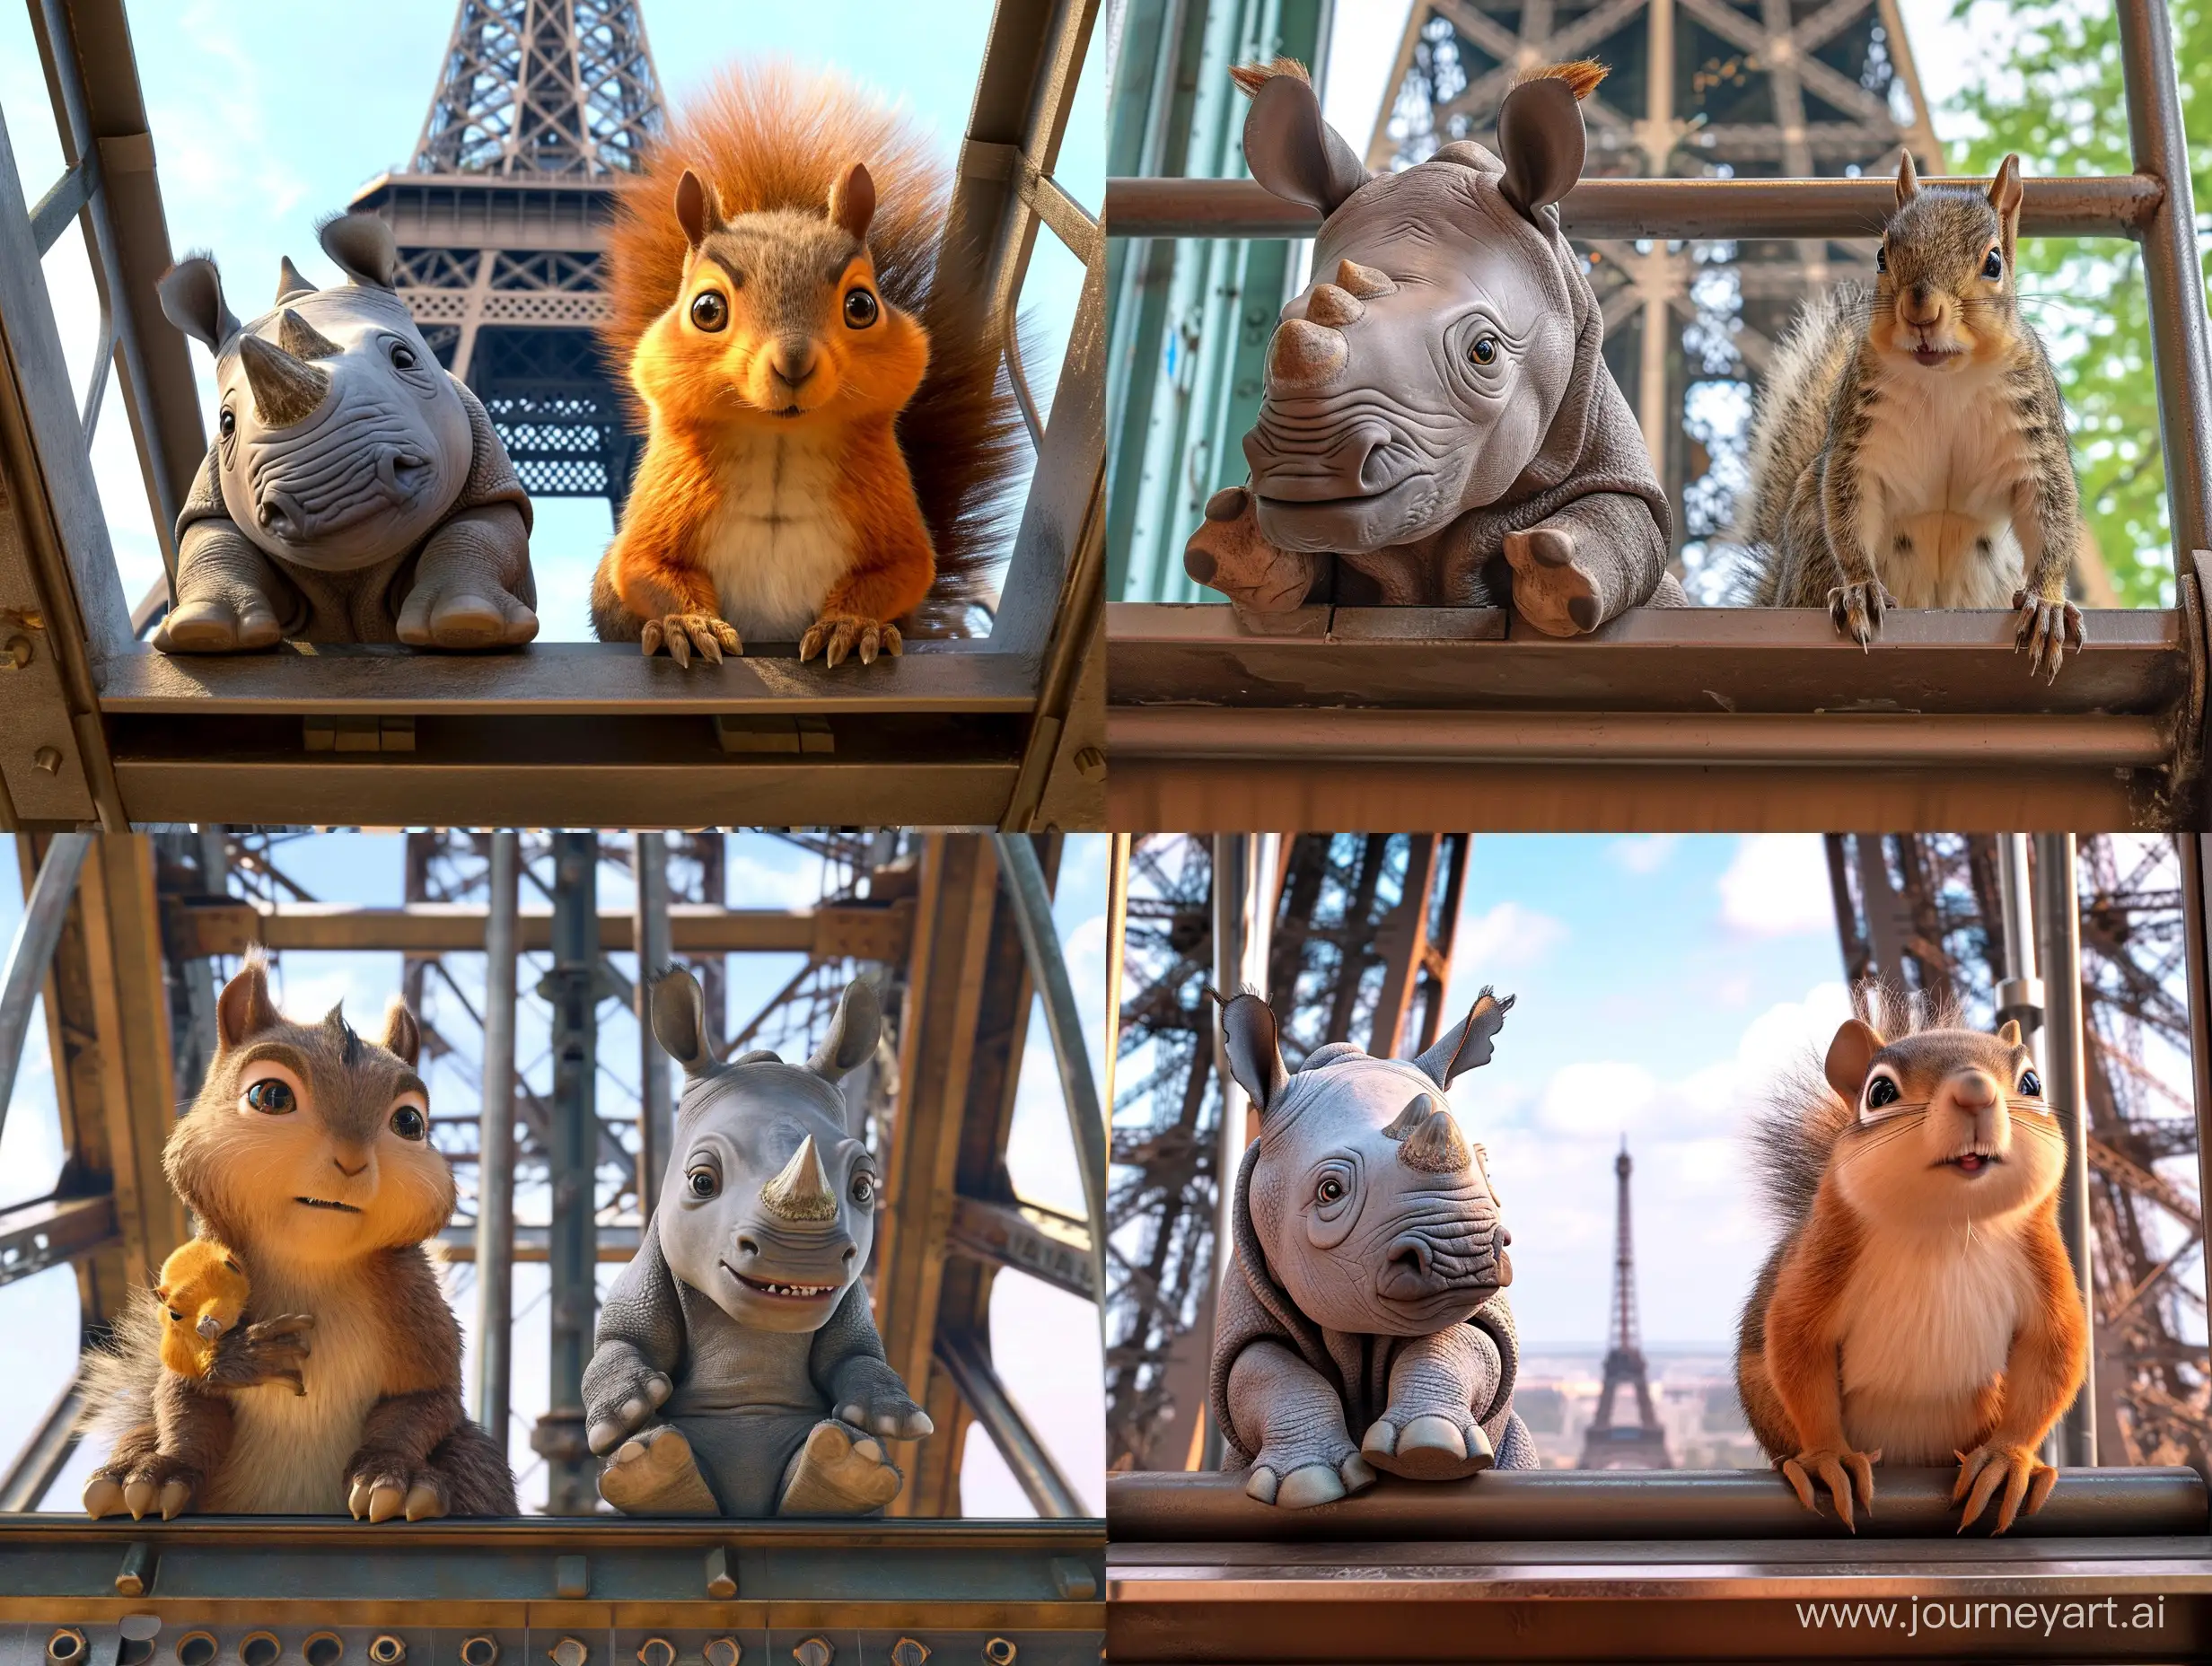 Adorable-Baby-Rhino-and-Squirrel-Adventure-at-the-Eiffel-Tower